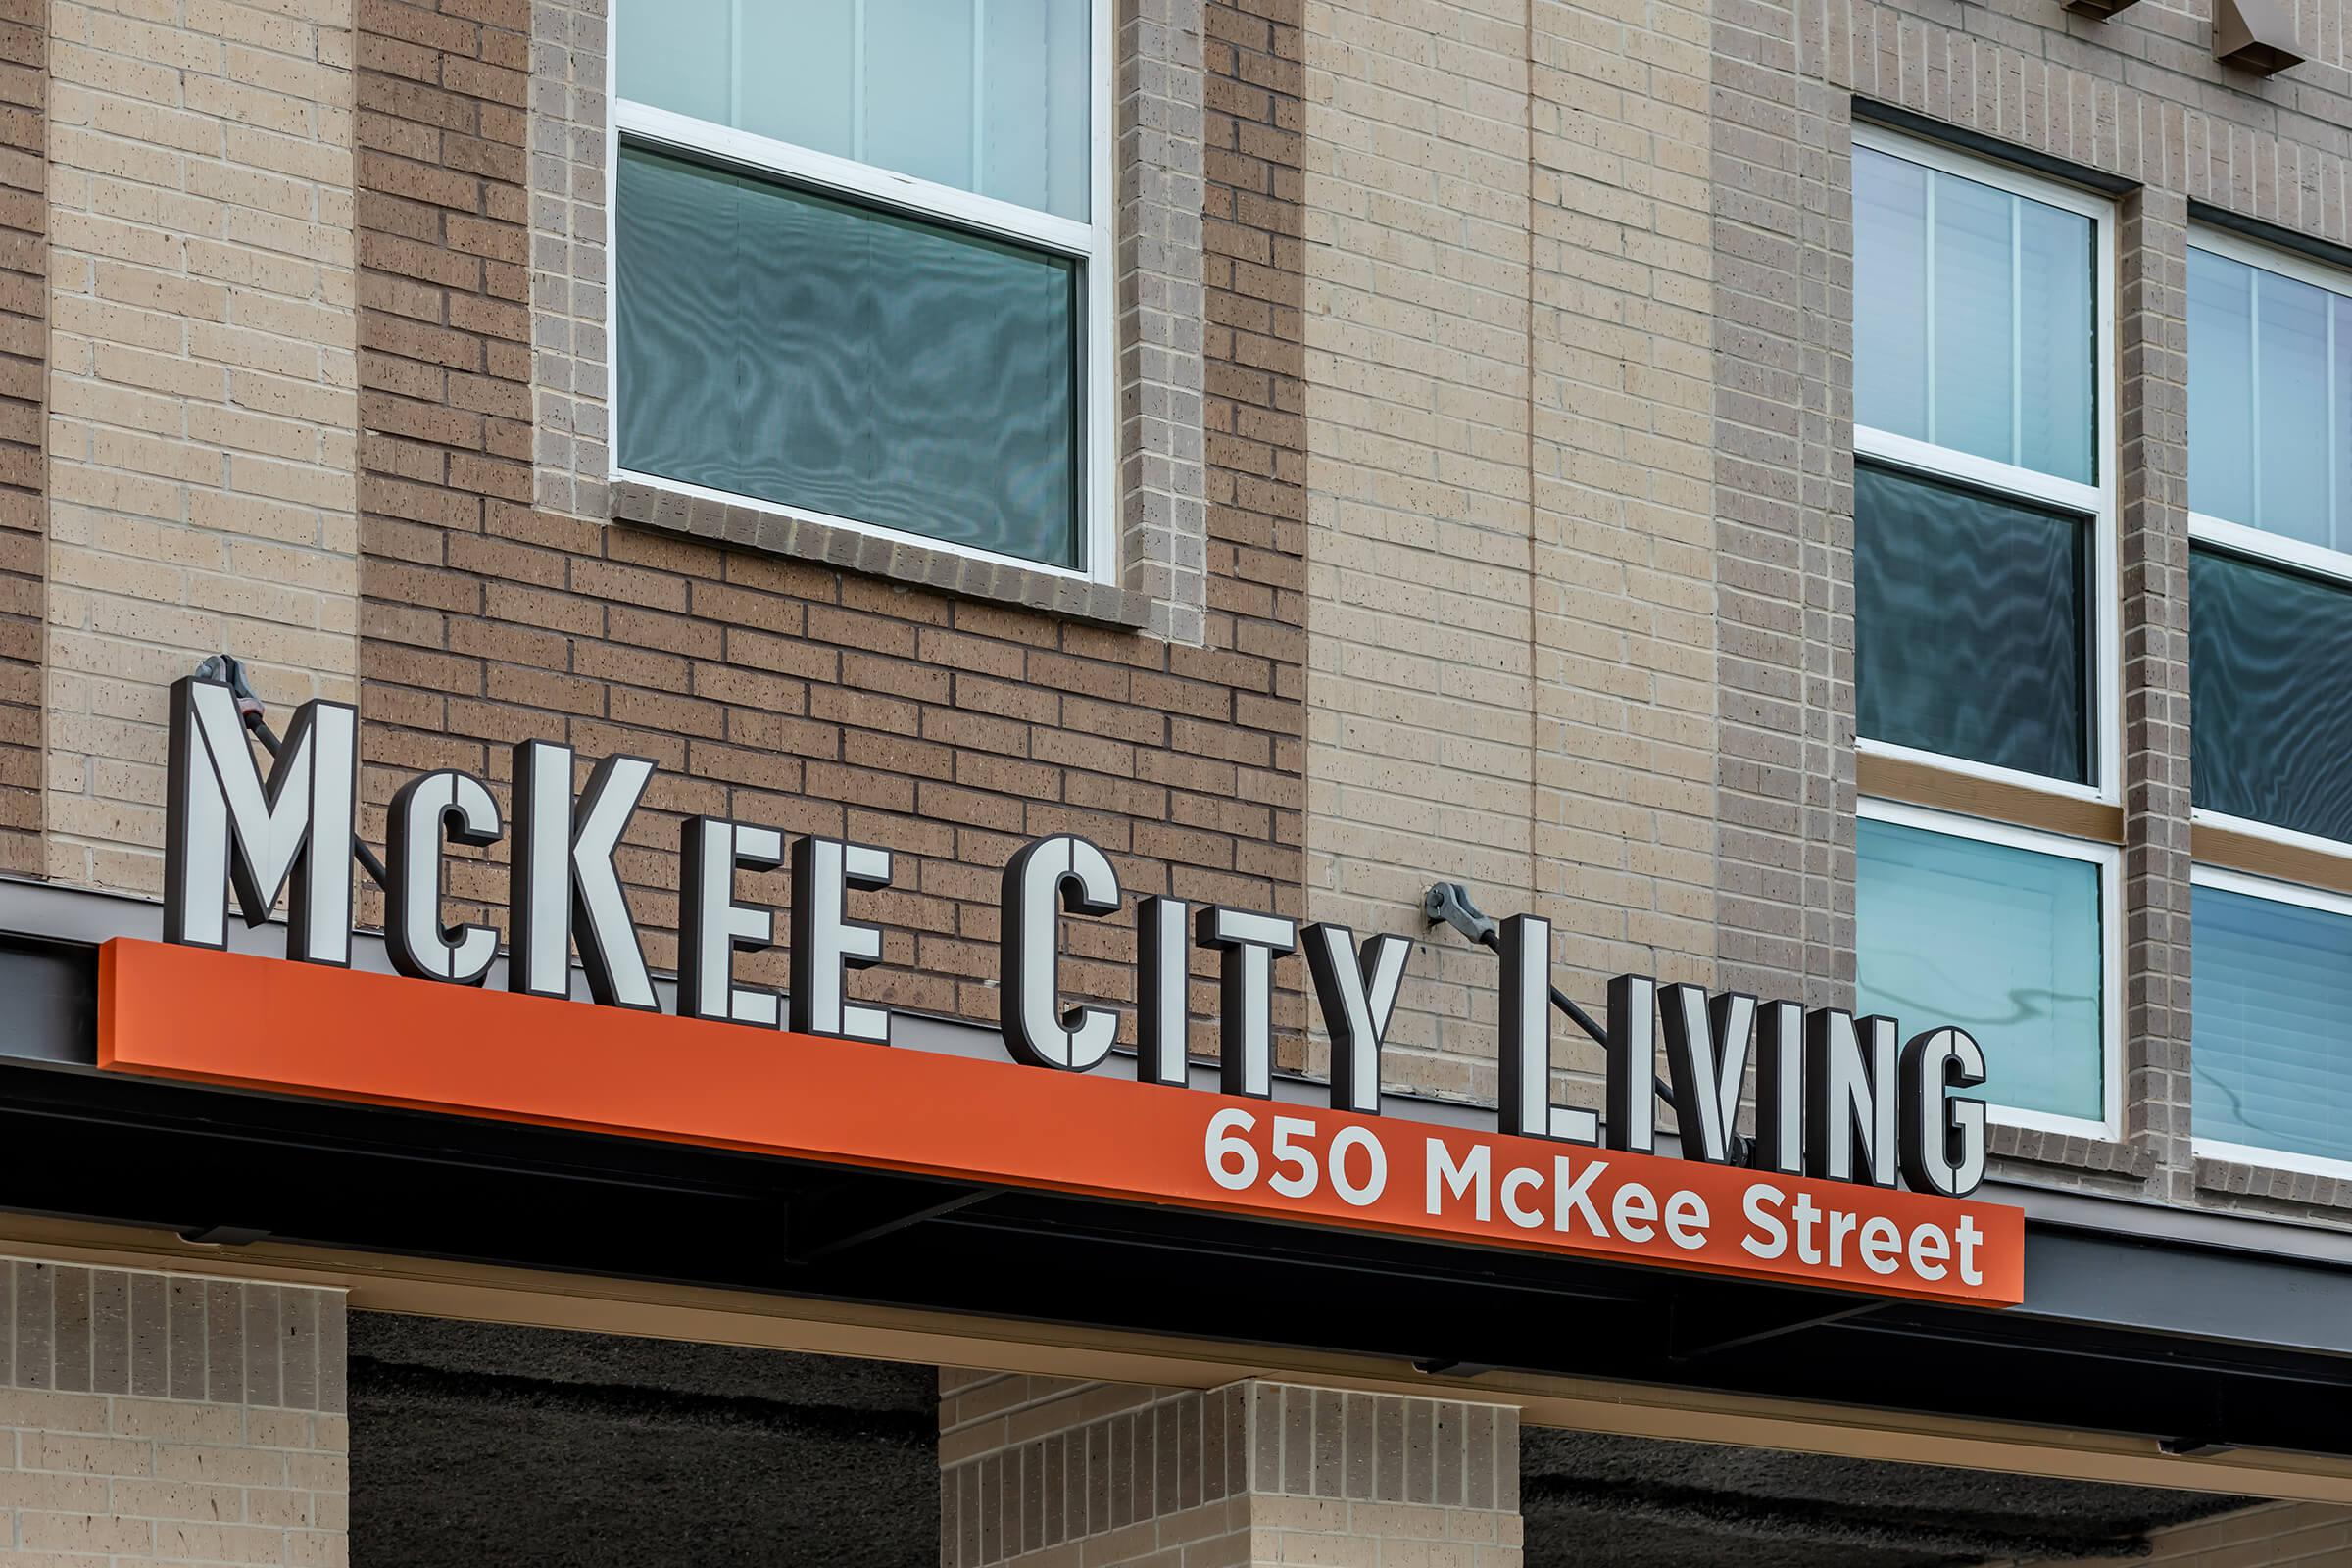 WELCOME TO MCKEE CITY LIVING APARTMENTS IN HOUSTON, TEXAS